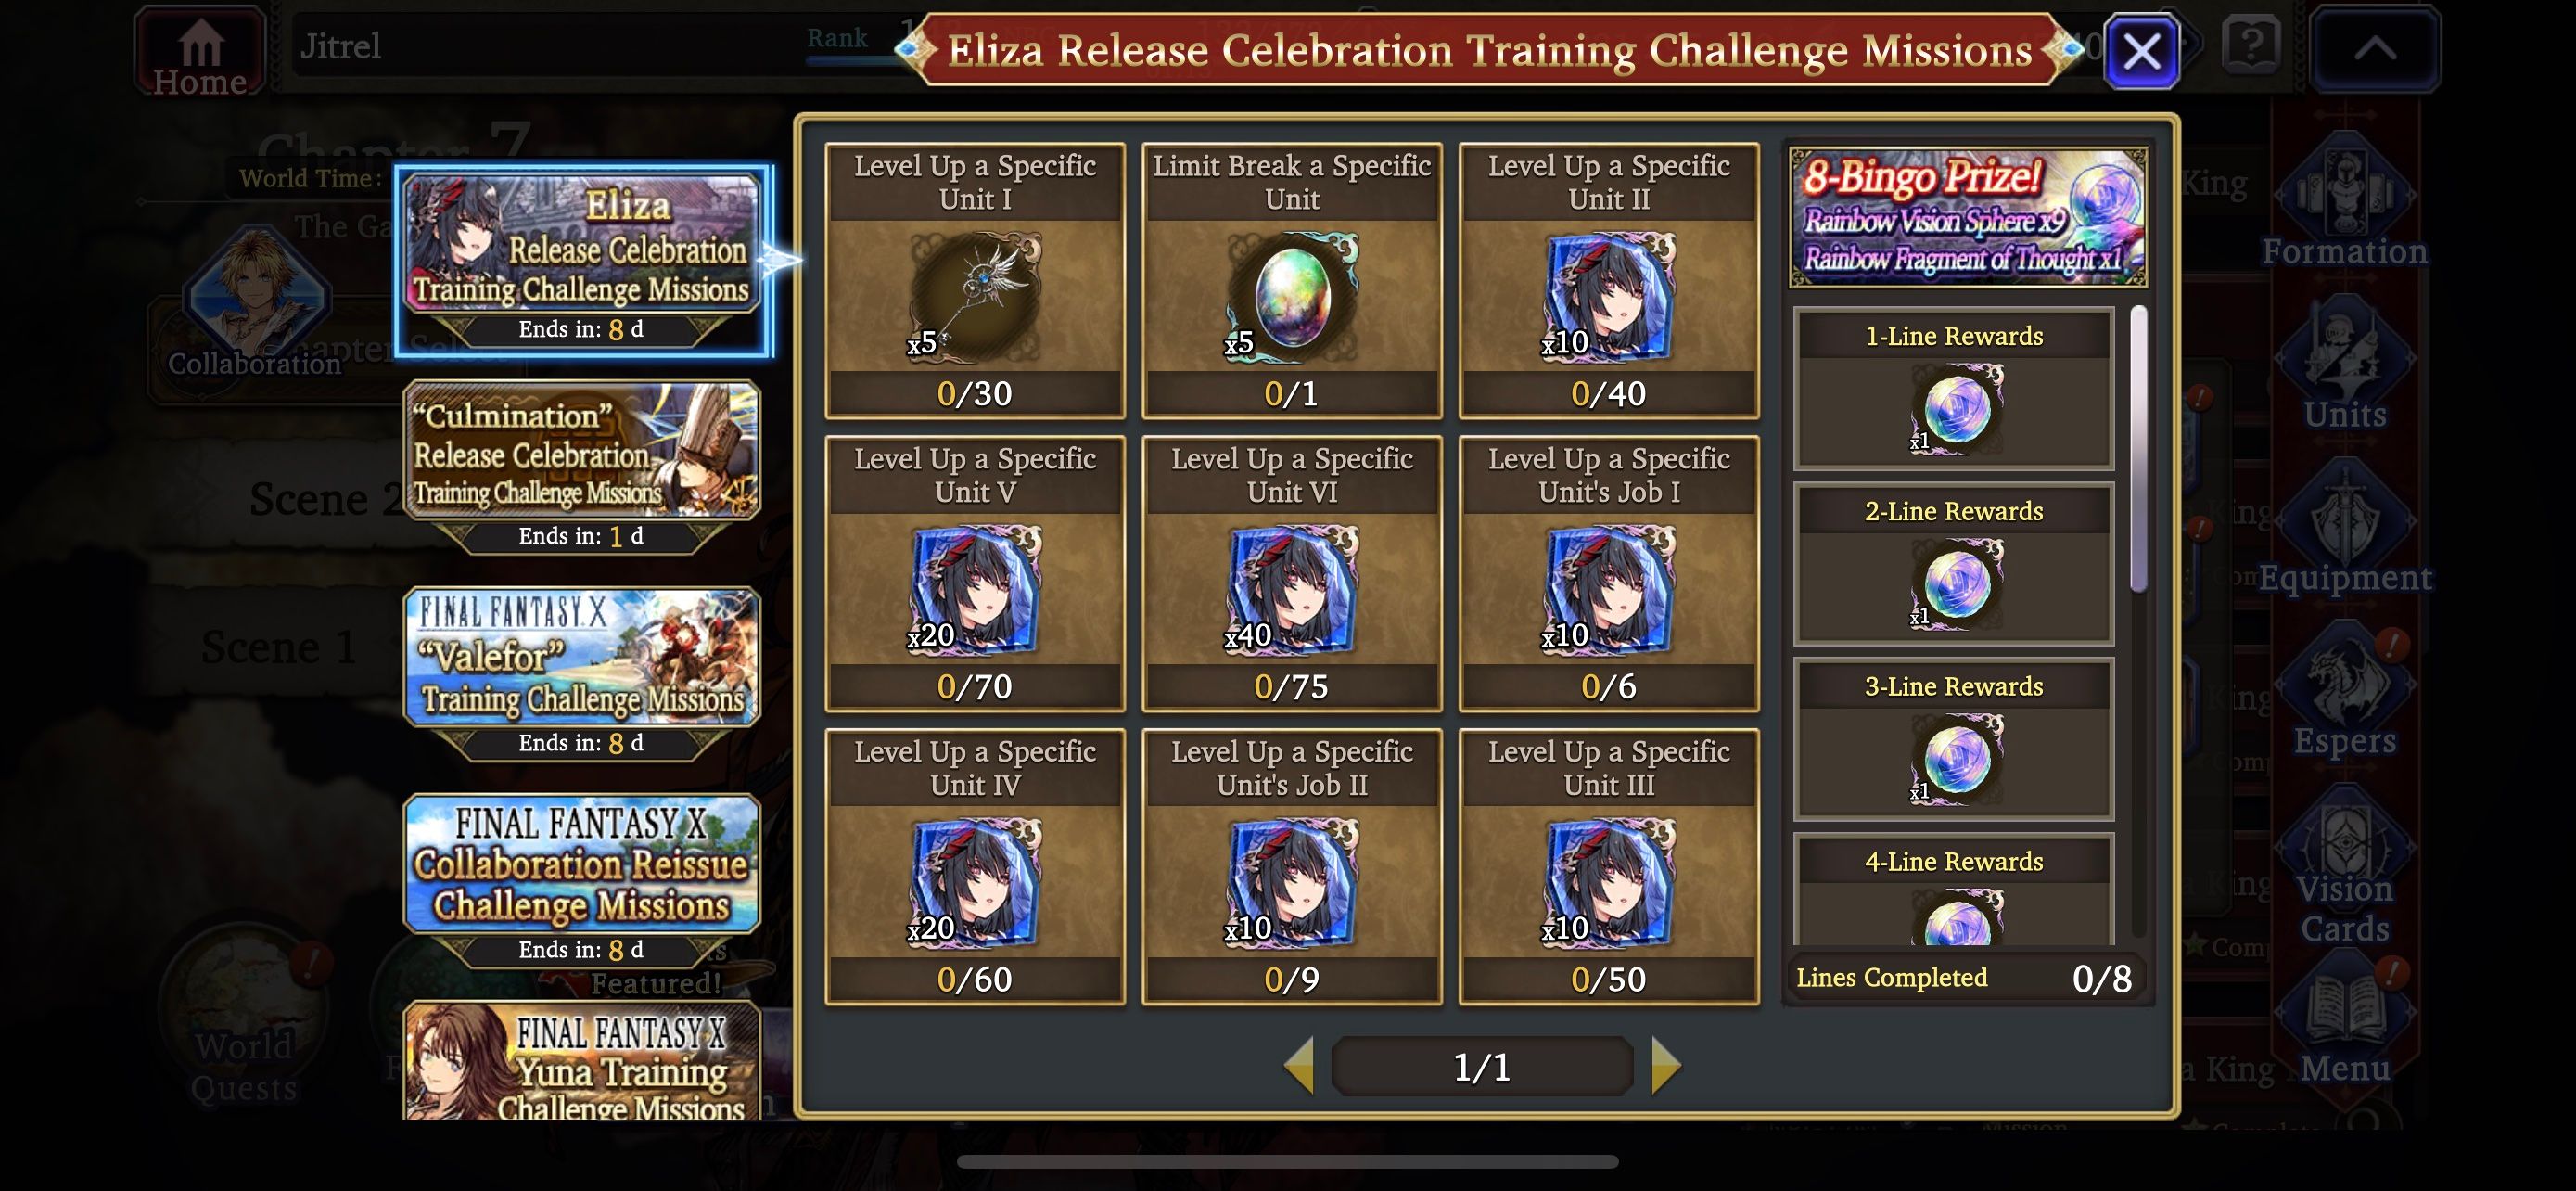 War of the Visions Final Fantasy Training Missions